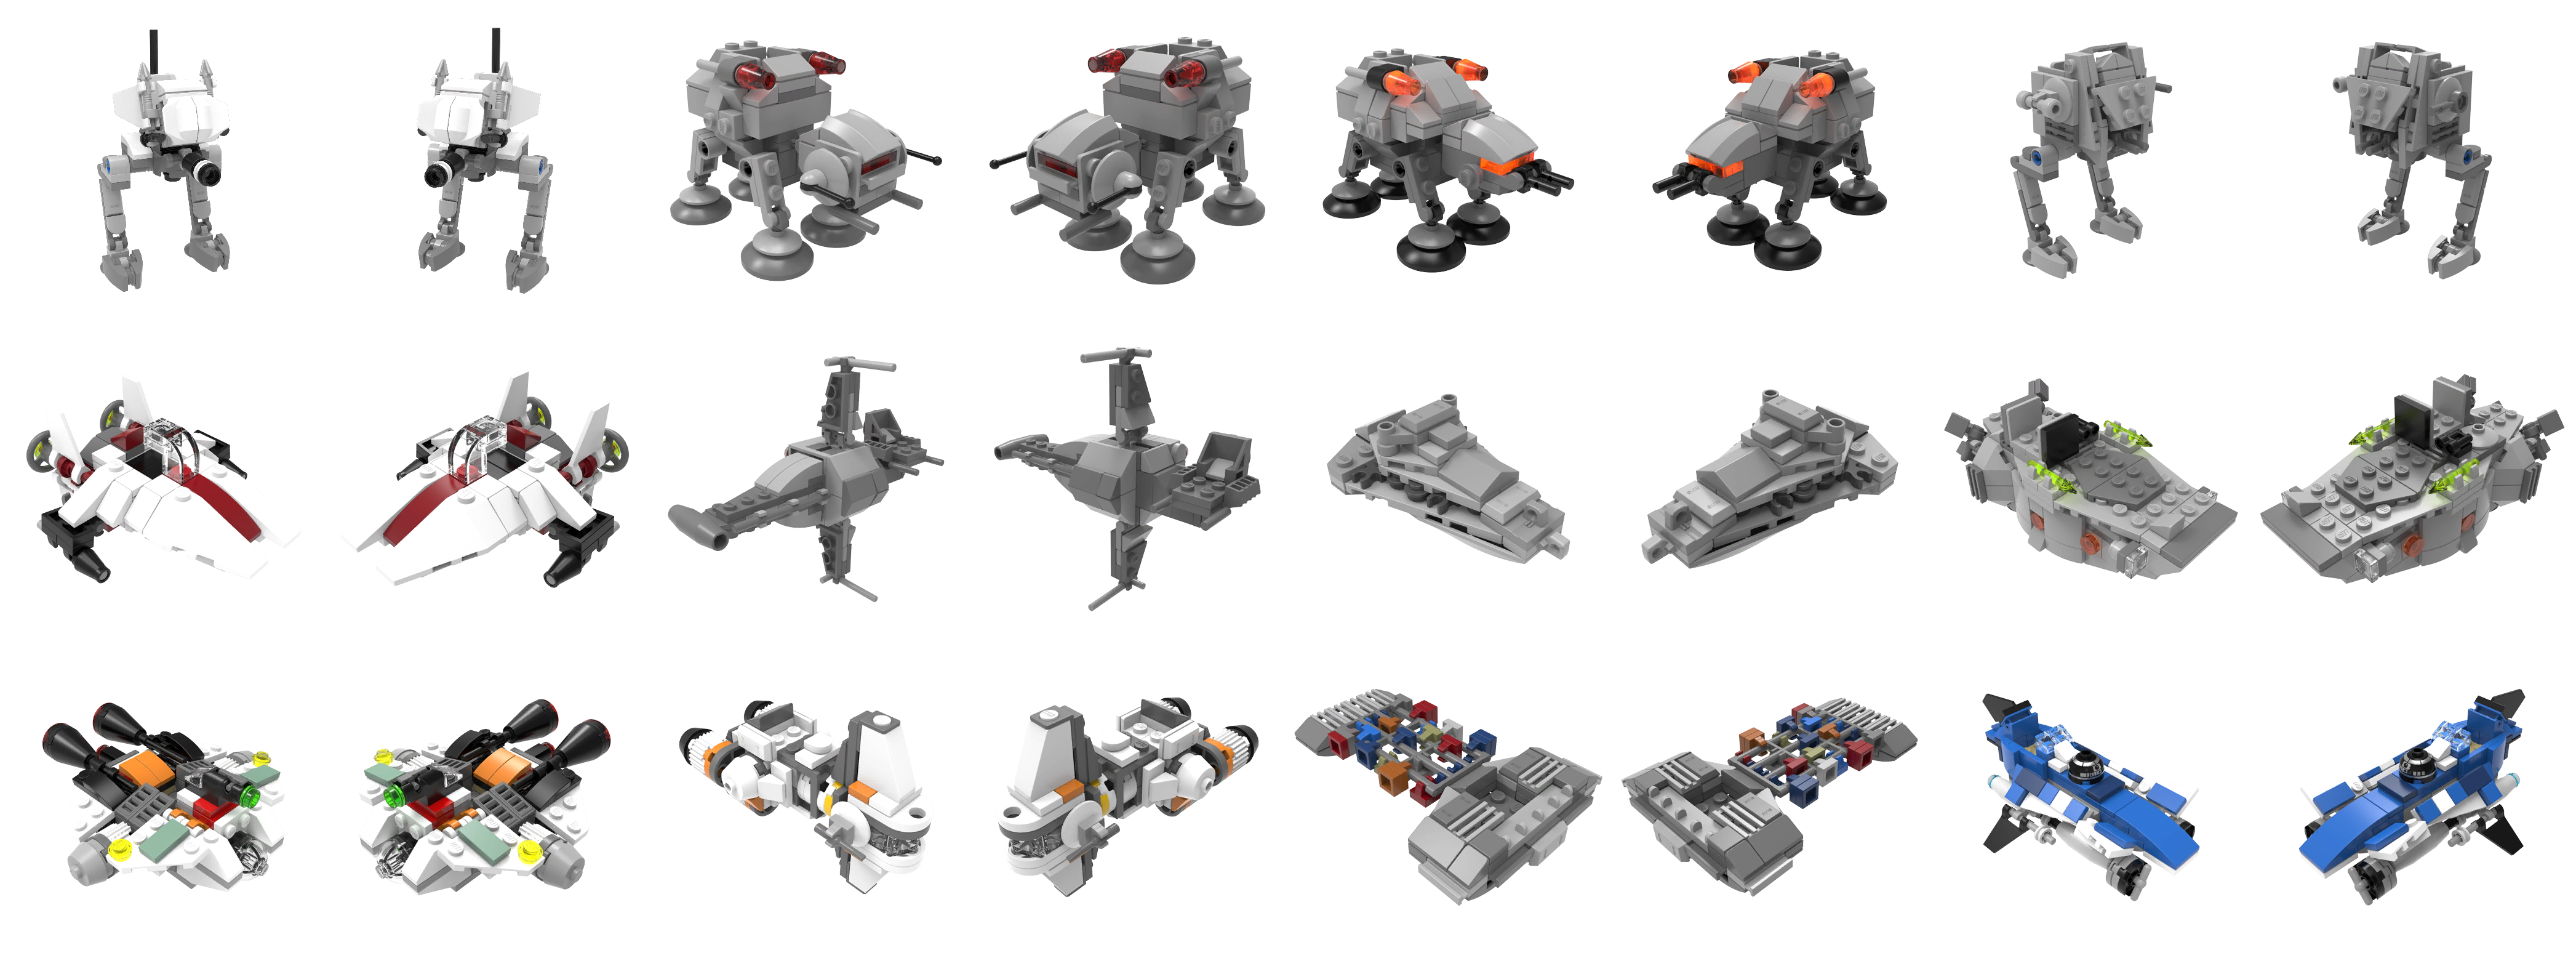 LEGO Star Wars: The Force Awakens - Vehicle Icons (Micro 1)